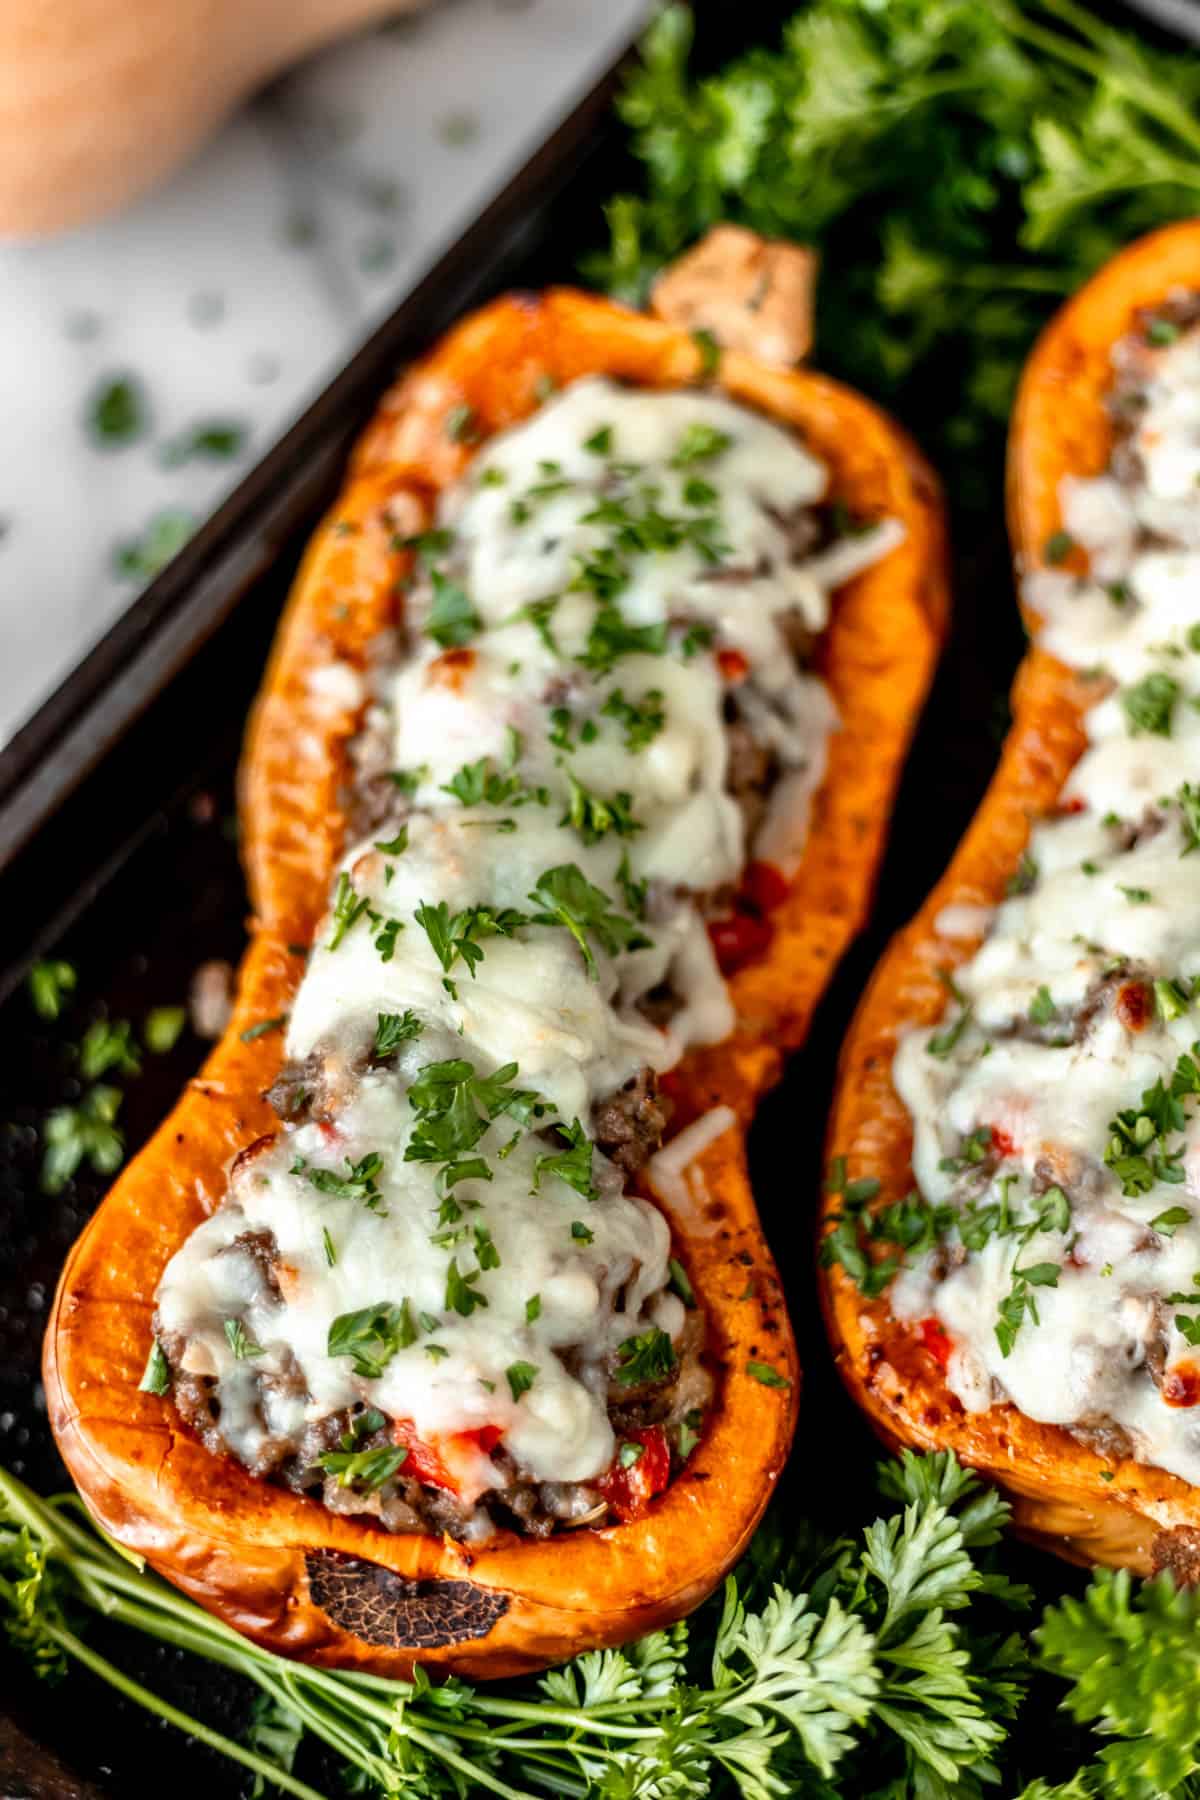 Two stuffed butternut squash halves on a baking sheet with parsley around it and a butternut squash in the background.